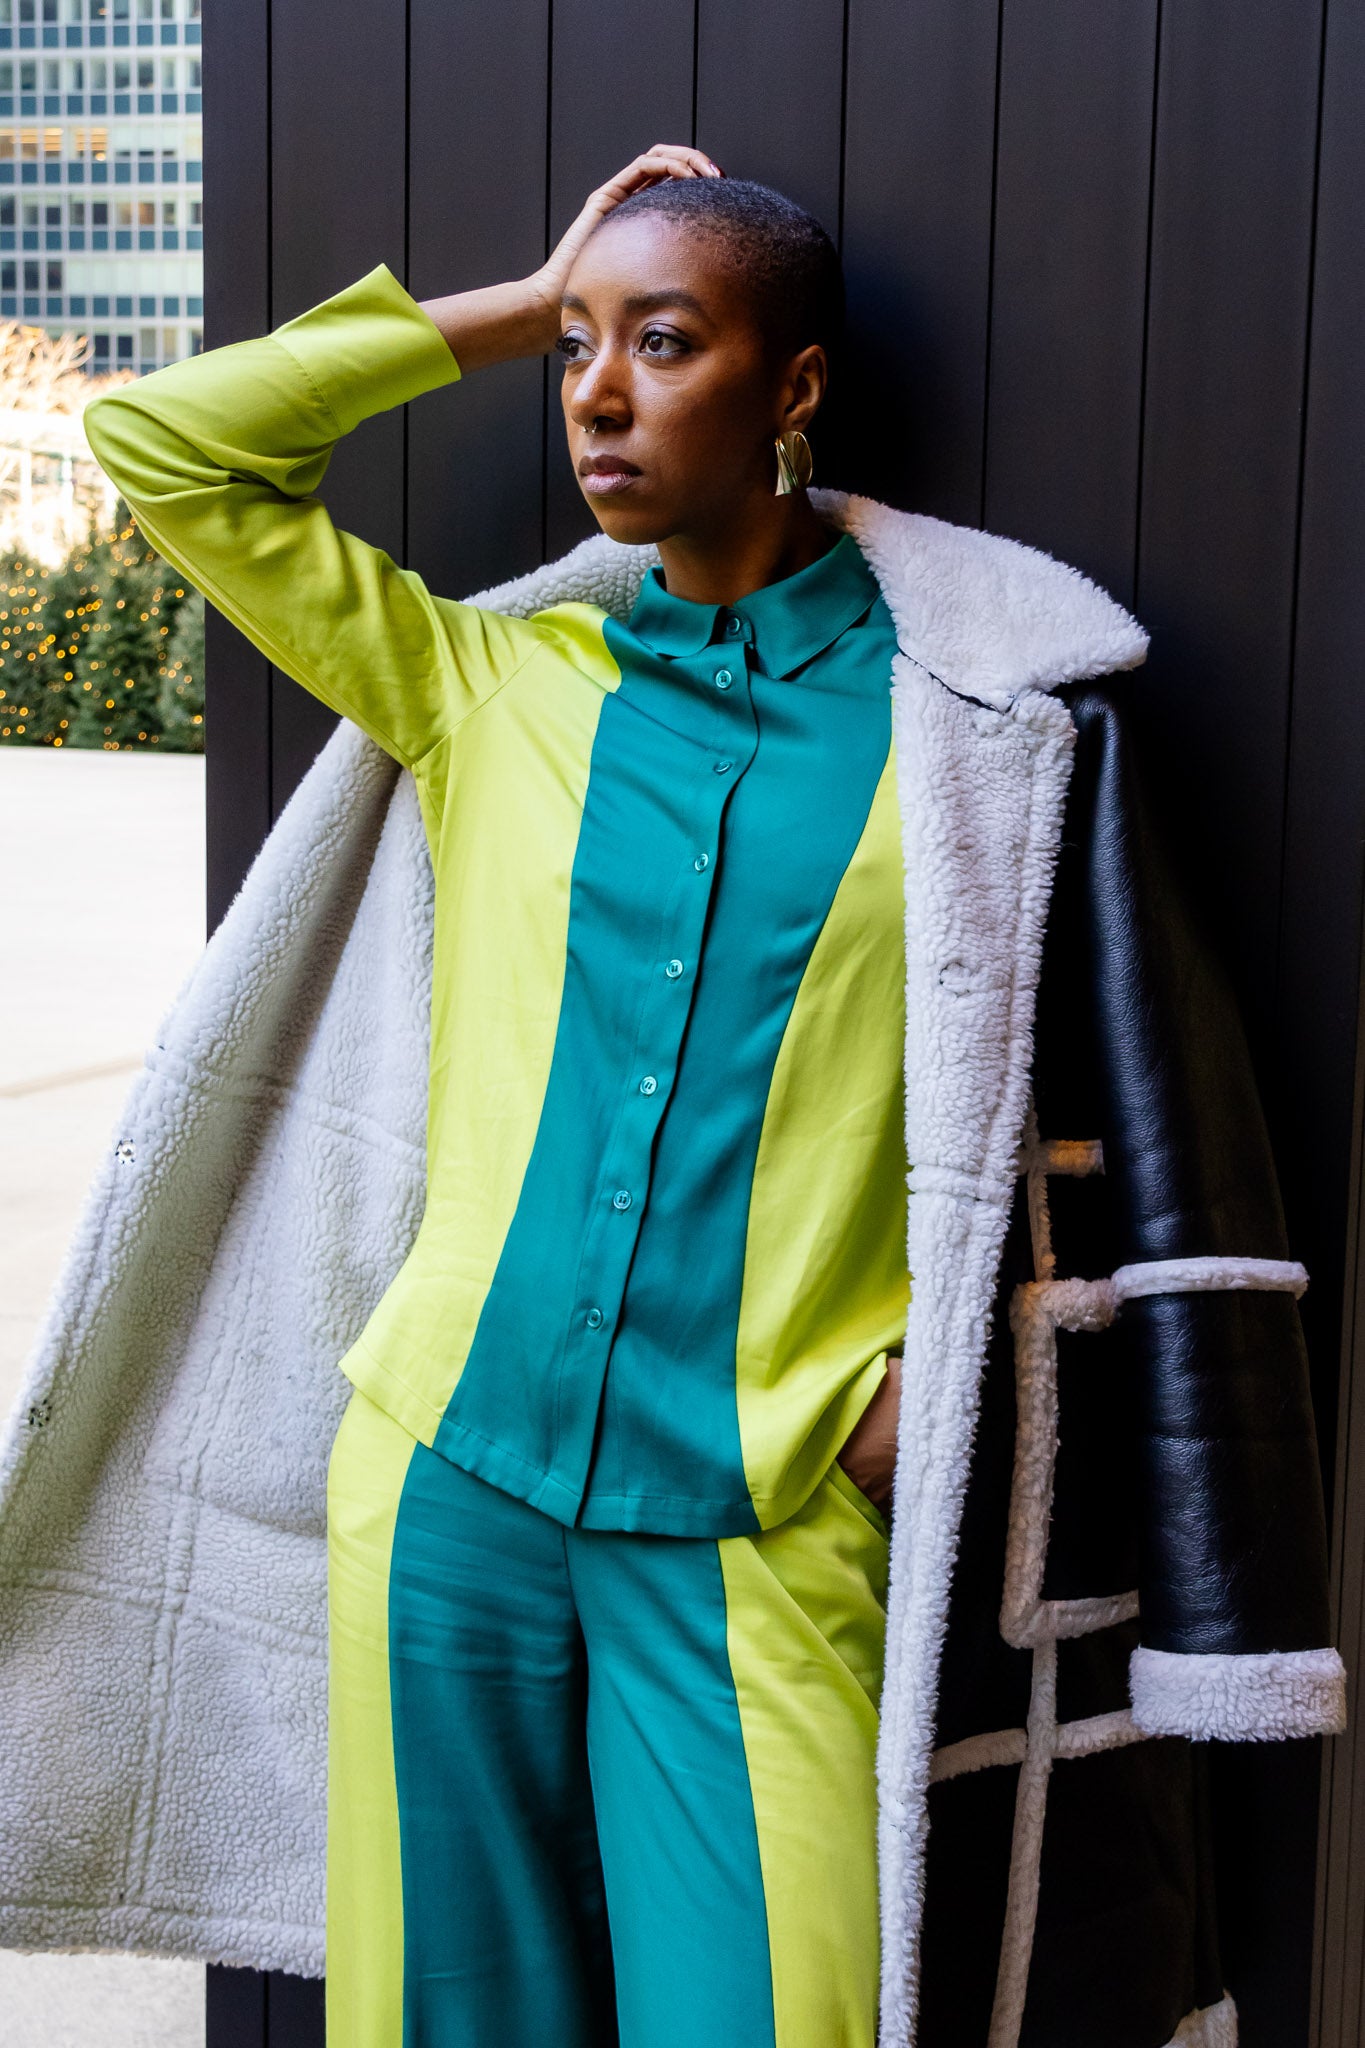 Briy, 6'2", wears the Robyn Bandele London color block long sleeve shirt made for tall women. 